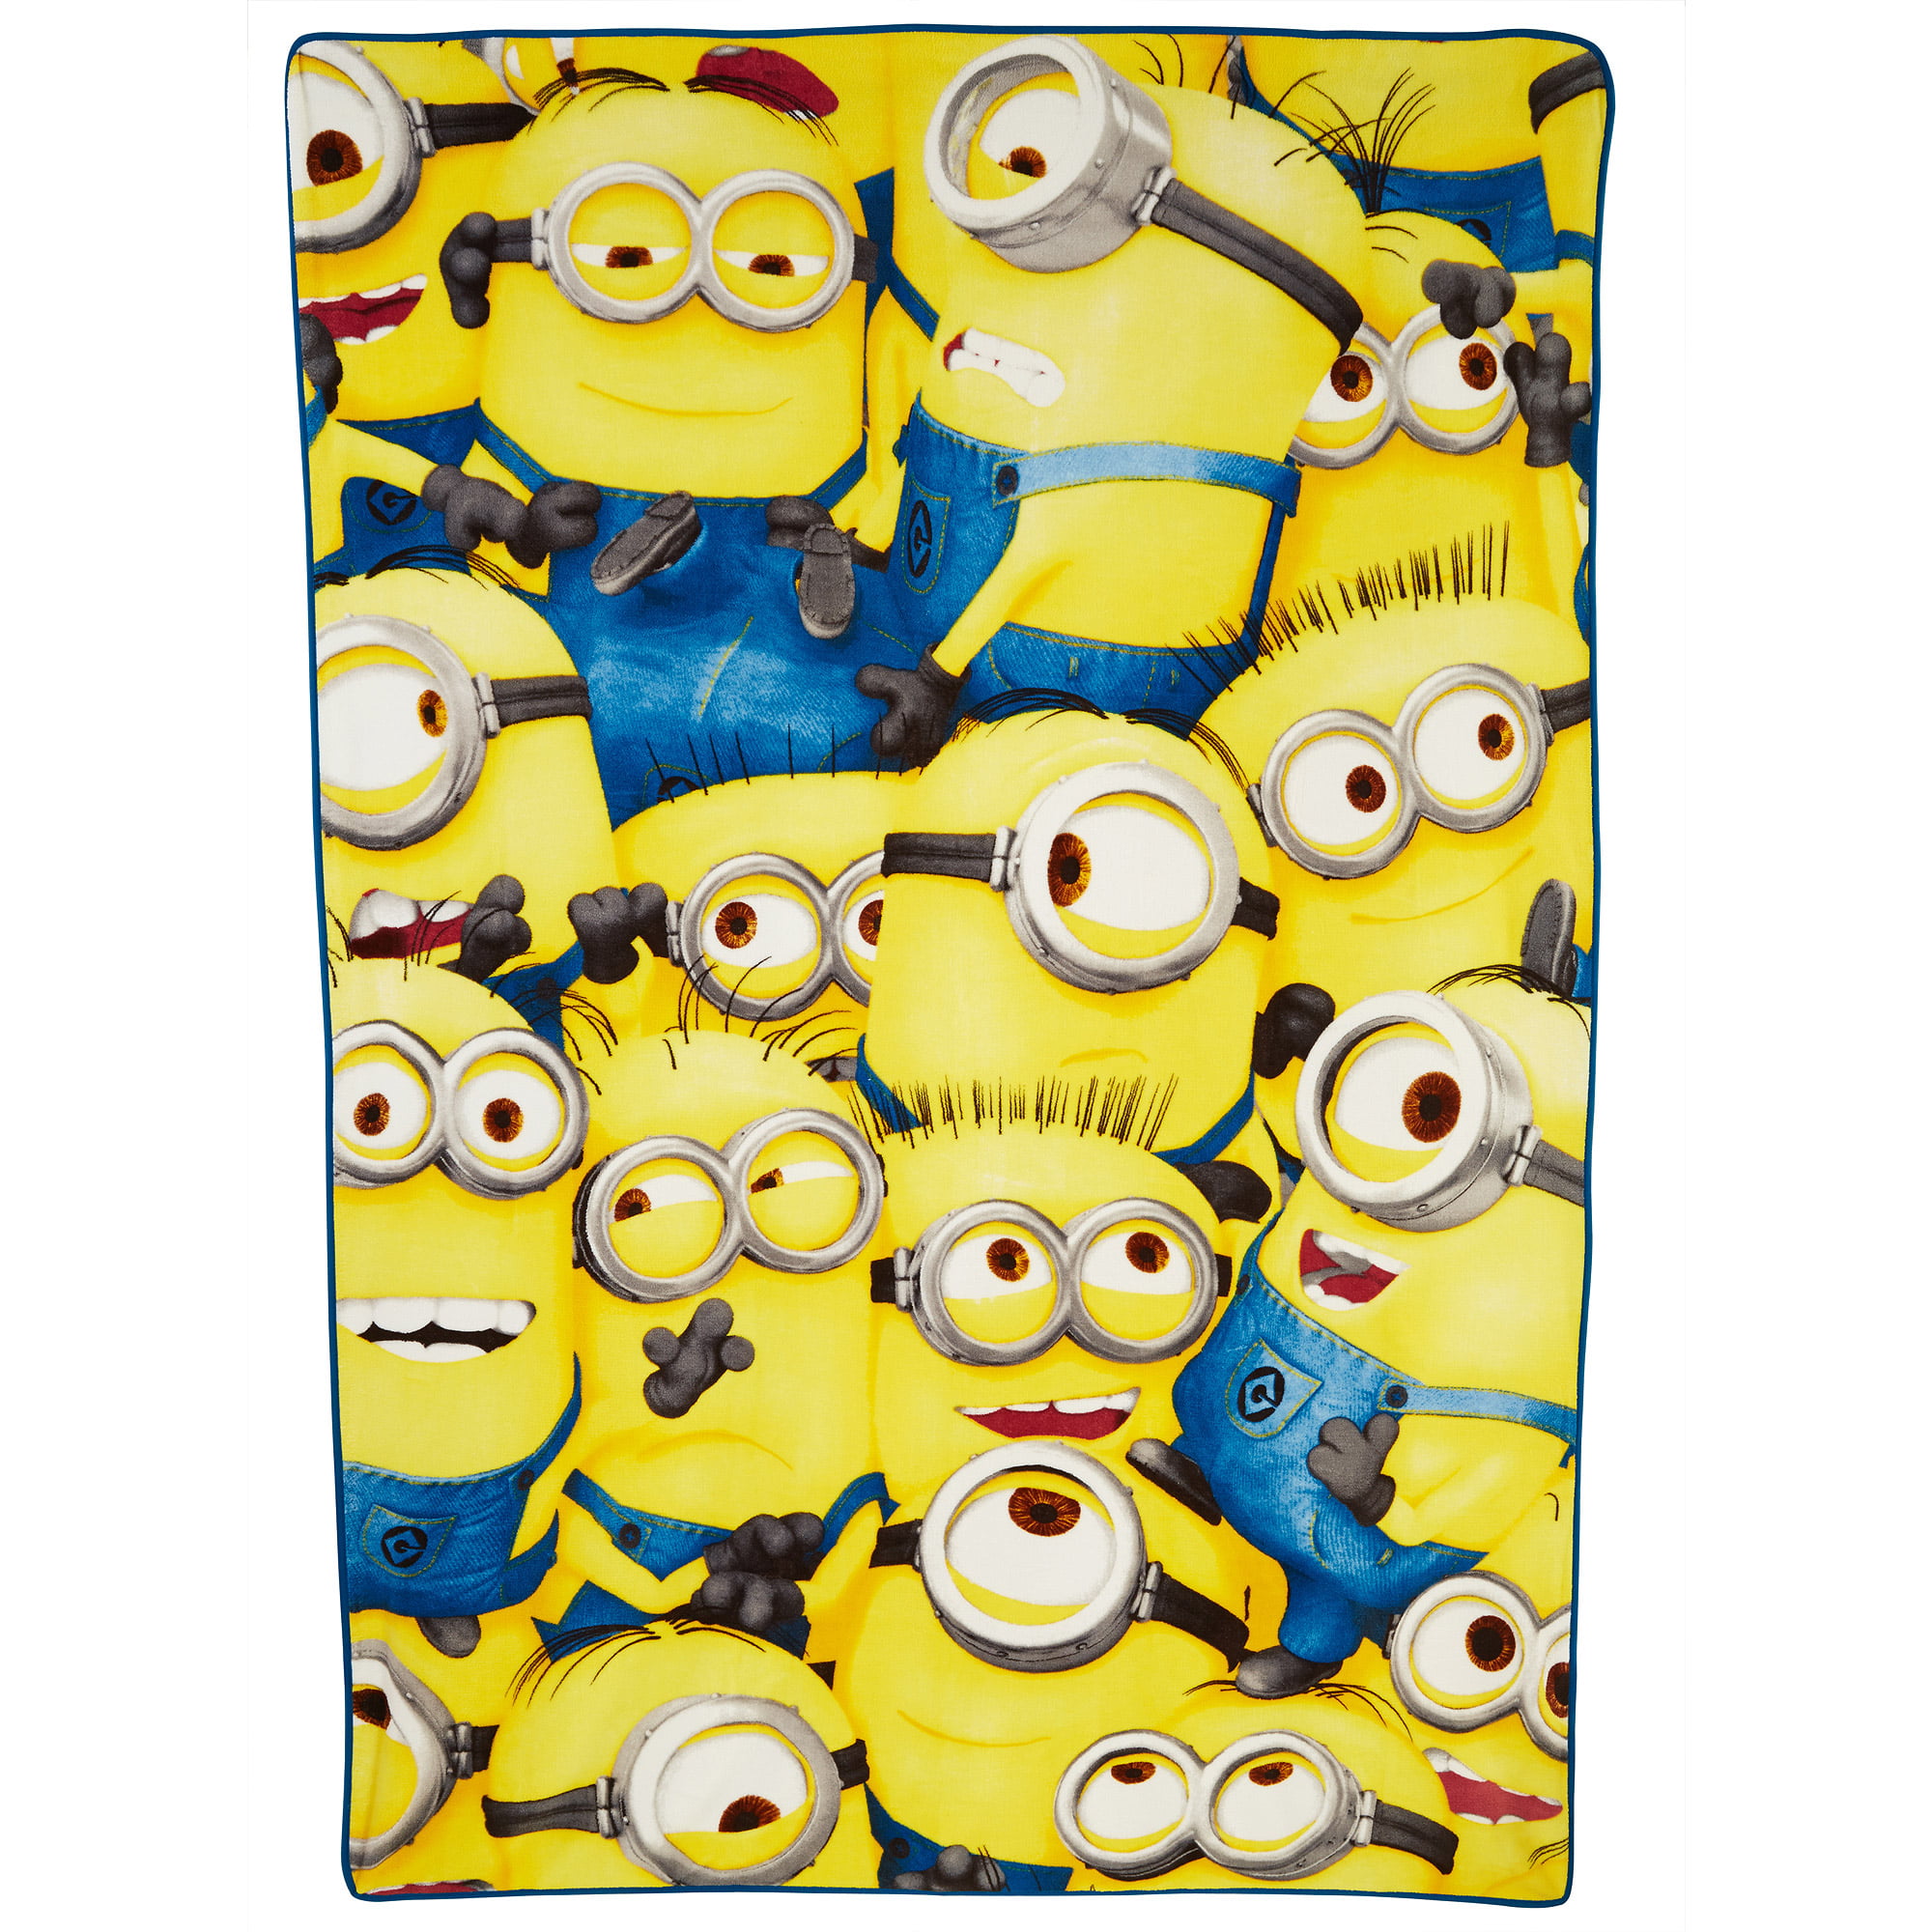 Despicable Me Minions Soft Cosy Warm Fleece Blanket Bed Travel Throw 